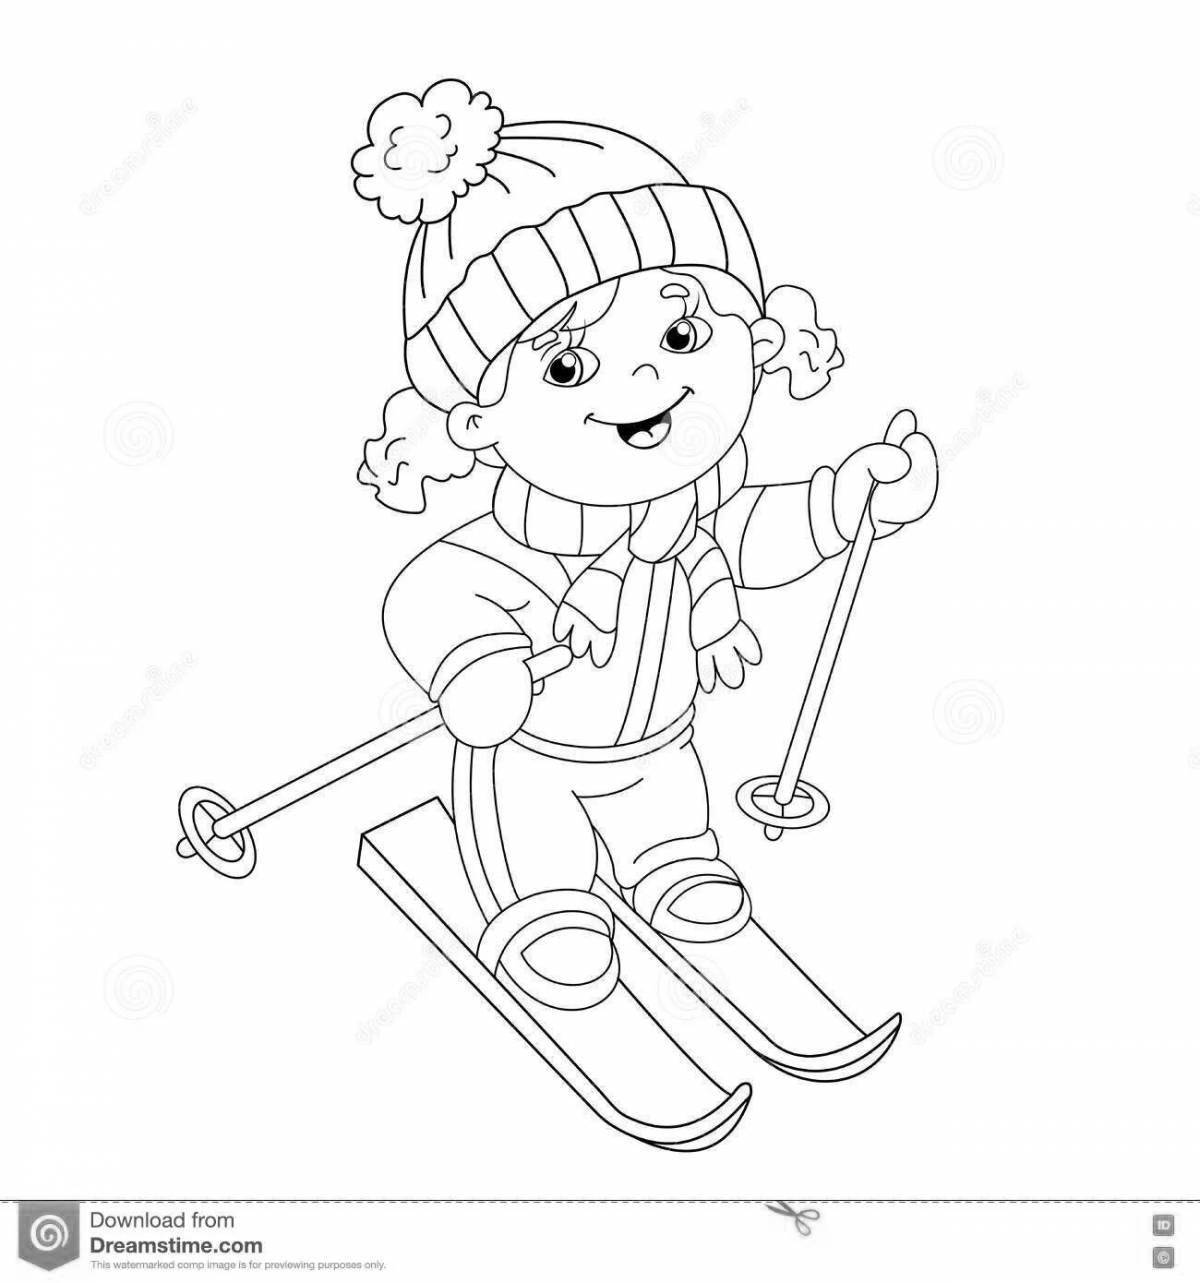 Coloring page cheerful senior skier